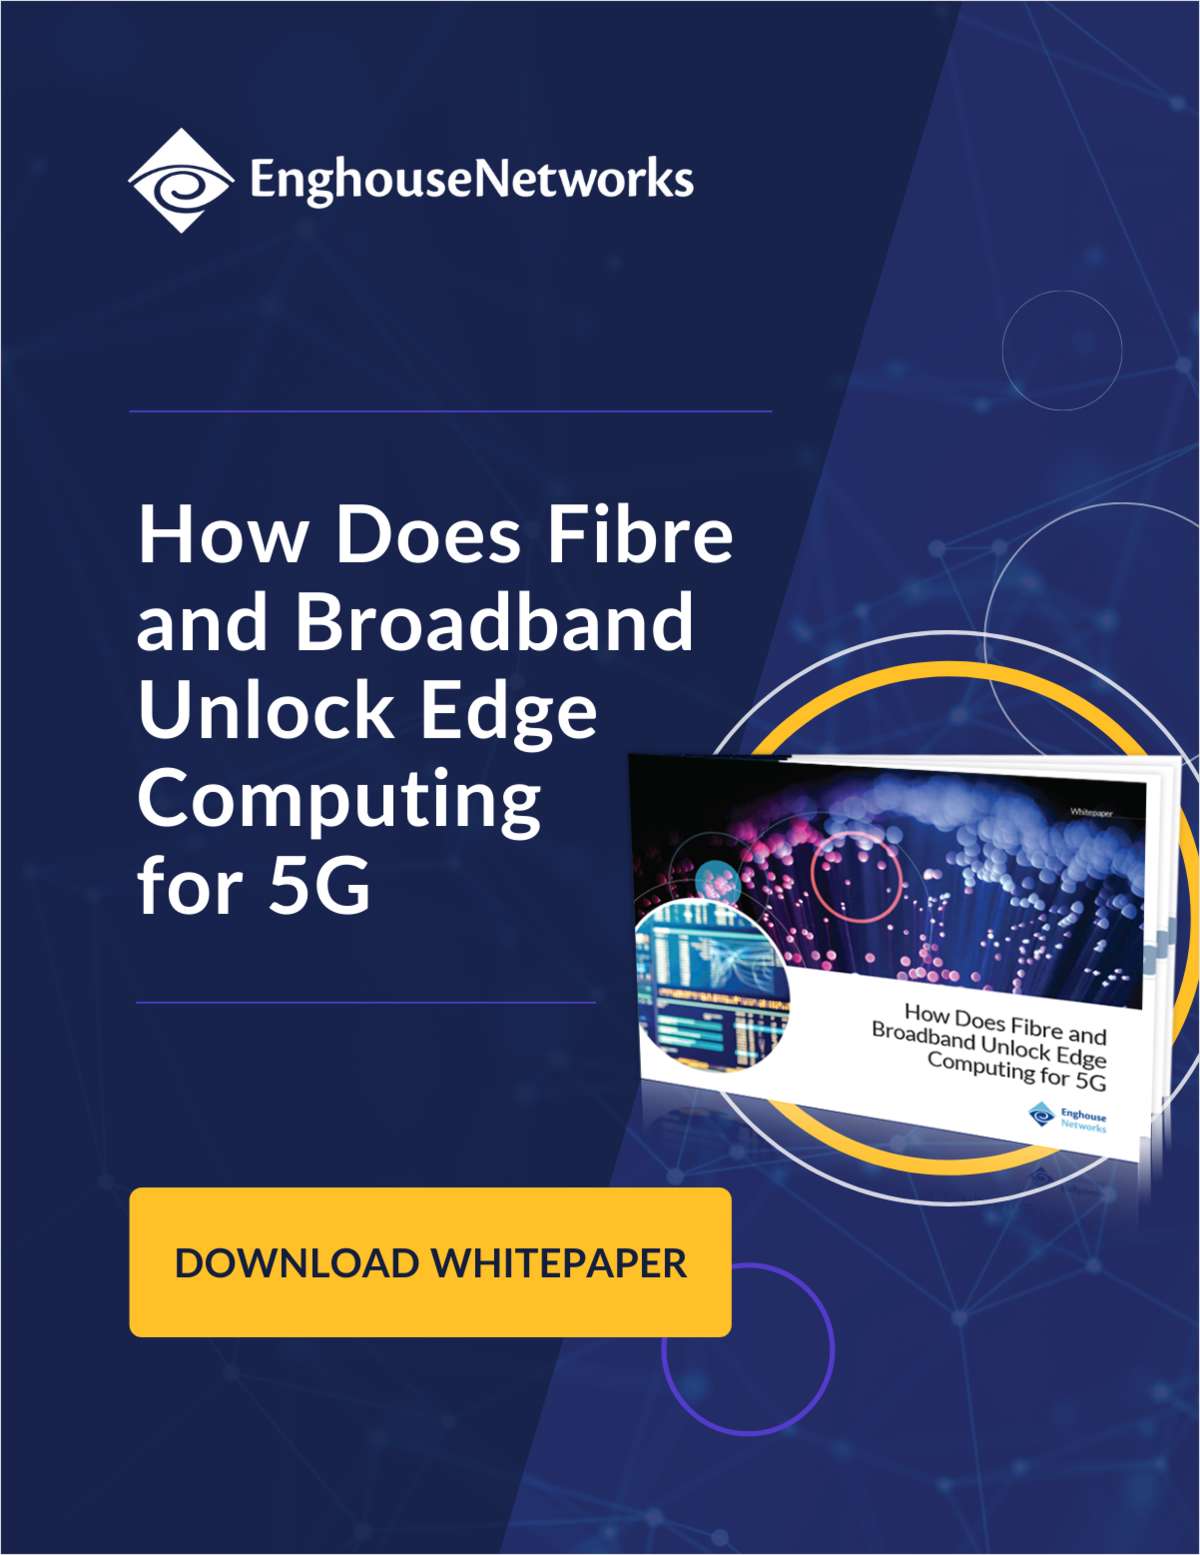 How Does Fibre and Broadband Unlock Edge Computing for 5G?